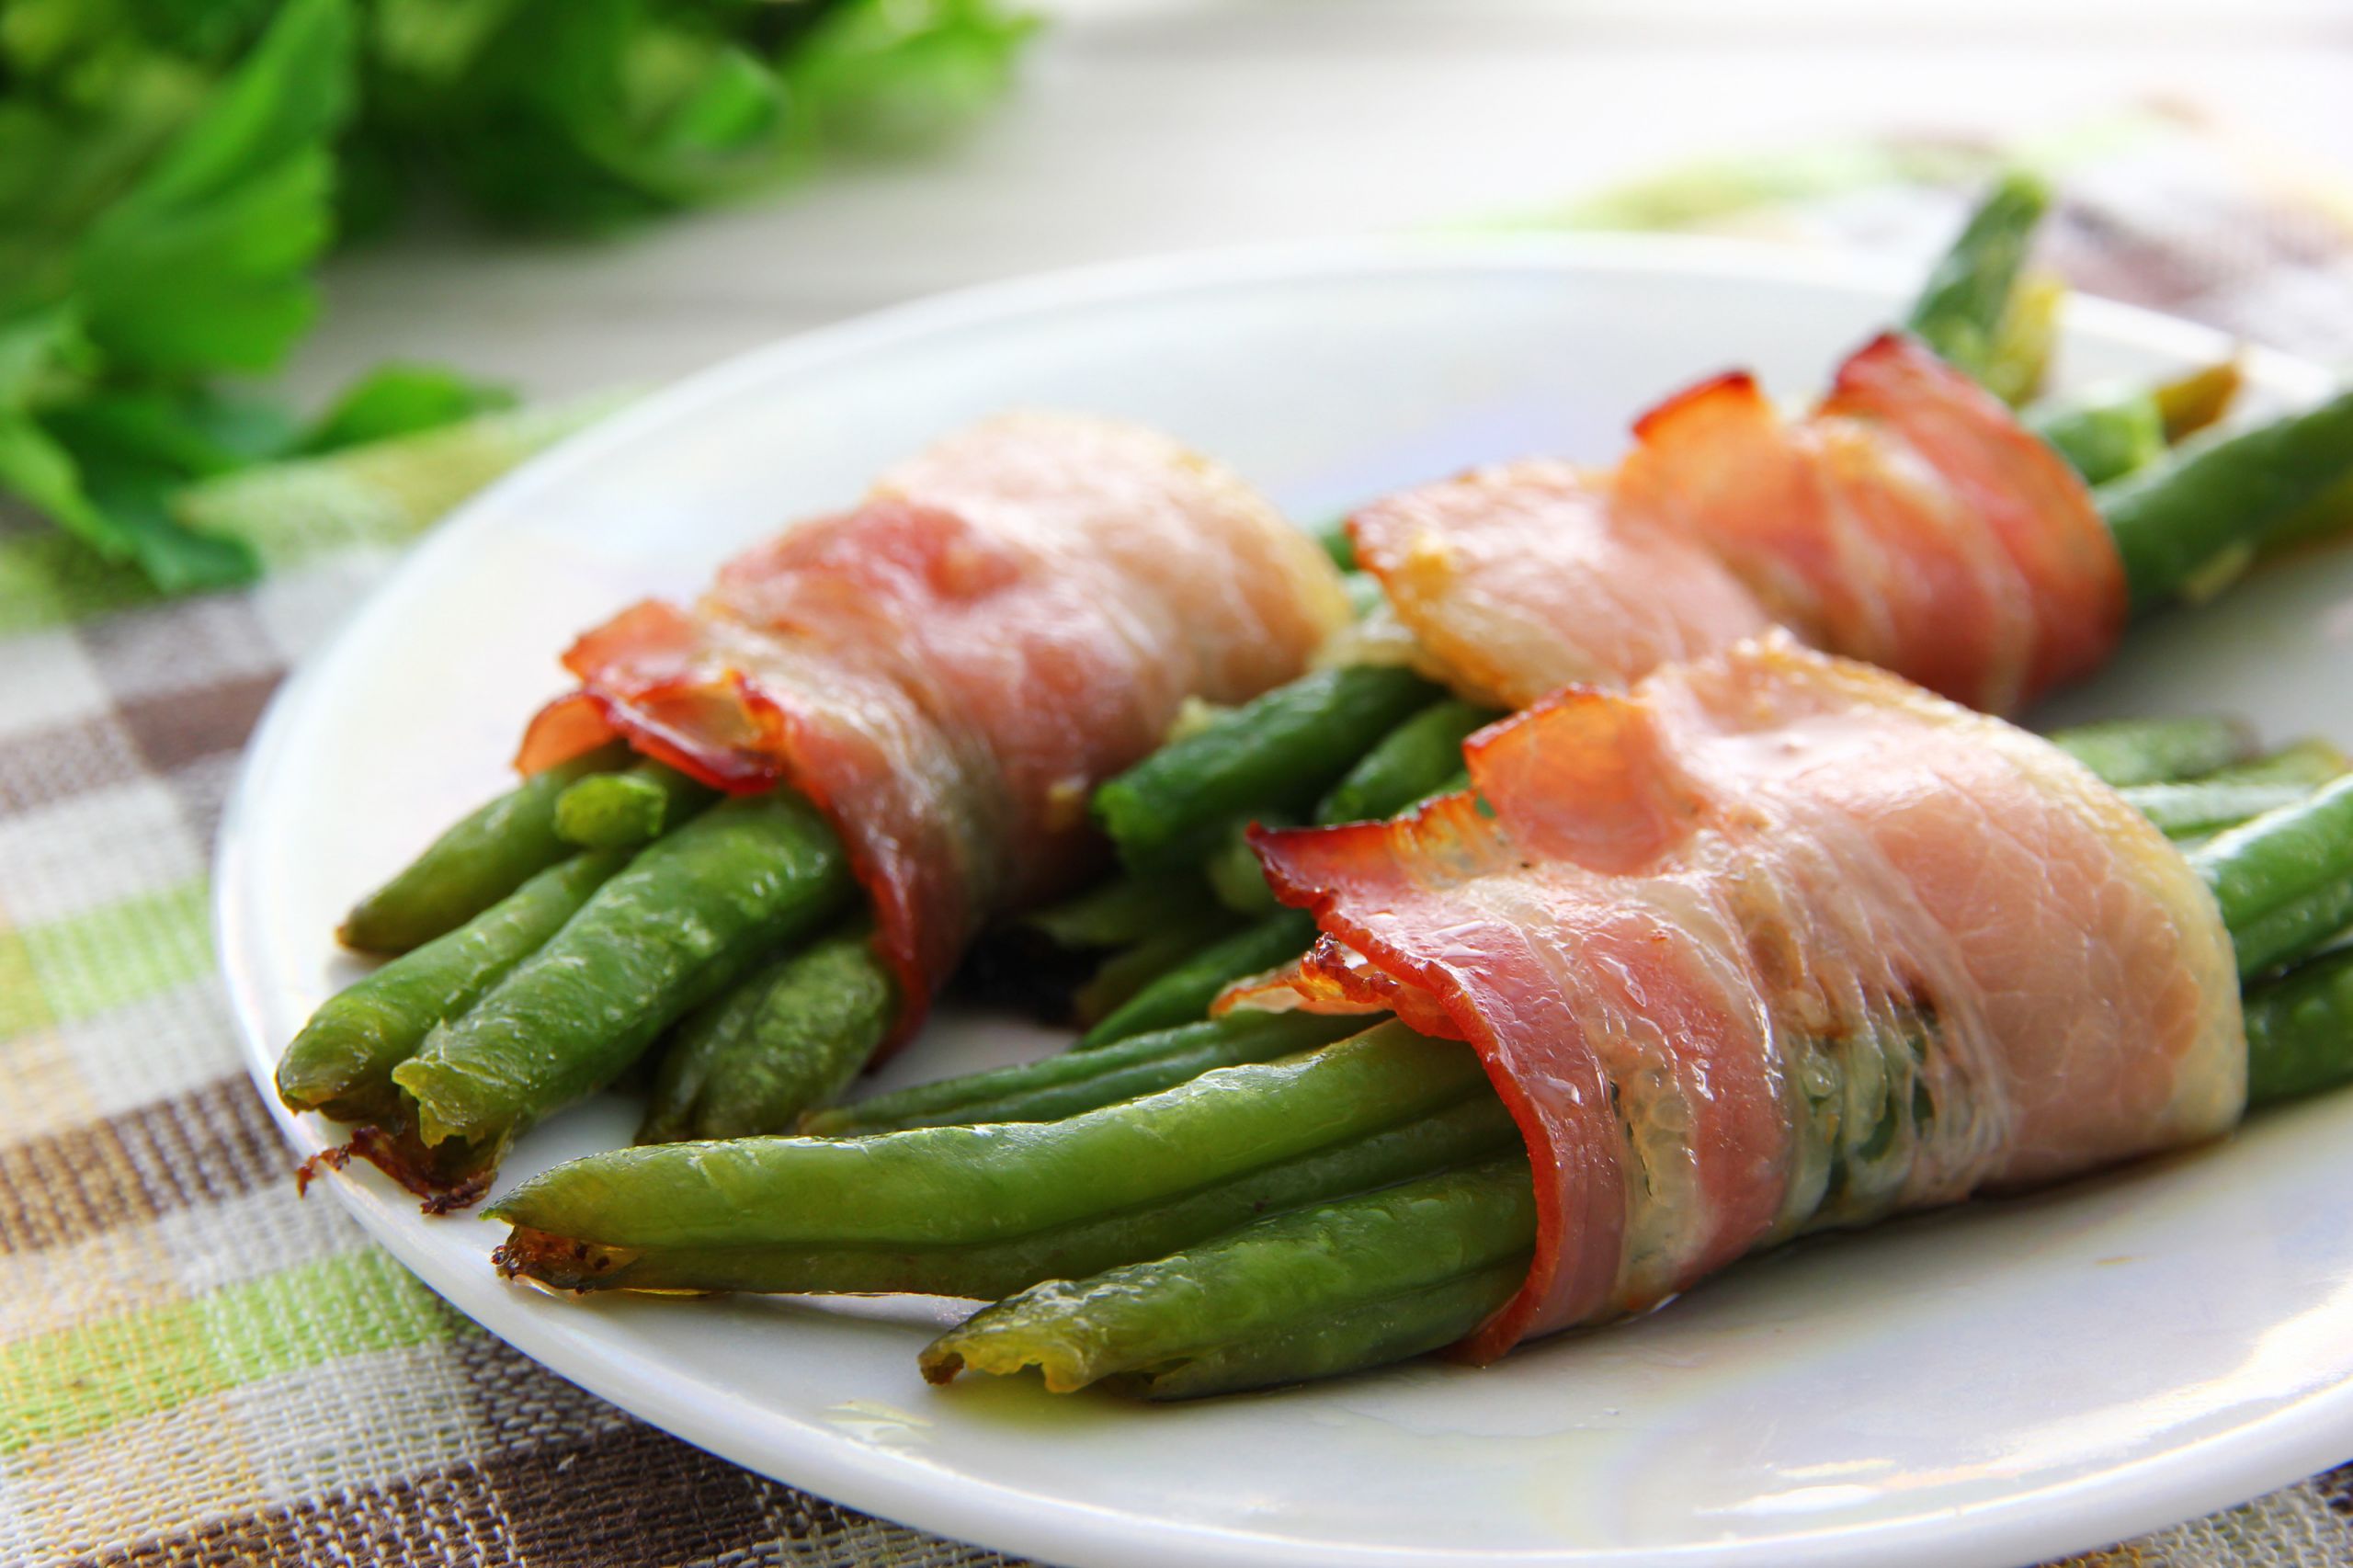 Green Bean Appetizer
 How to Make an Appetizer With Green Beans and Bacon 9 Steps